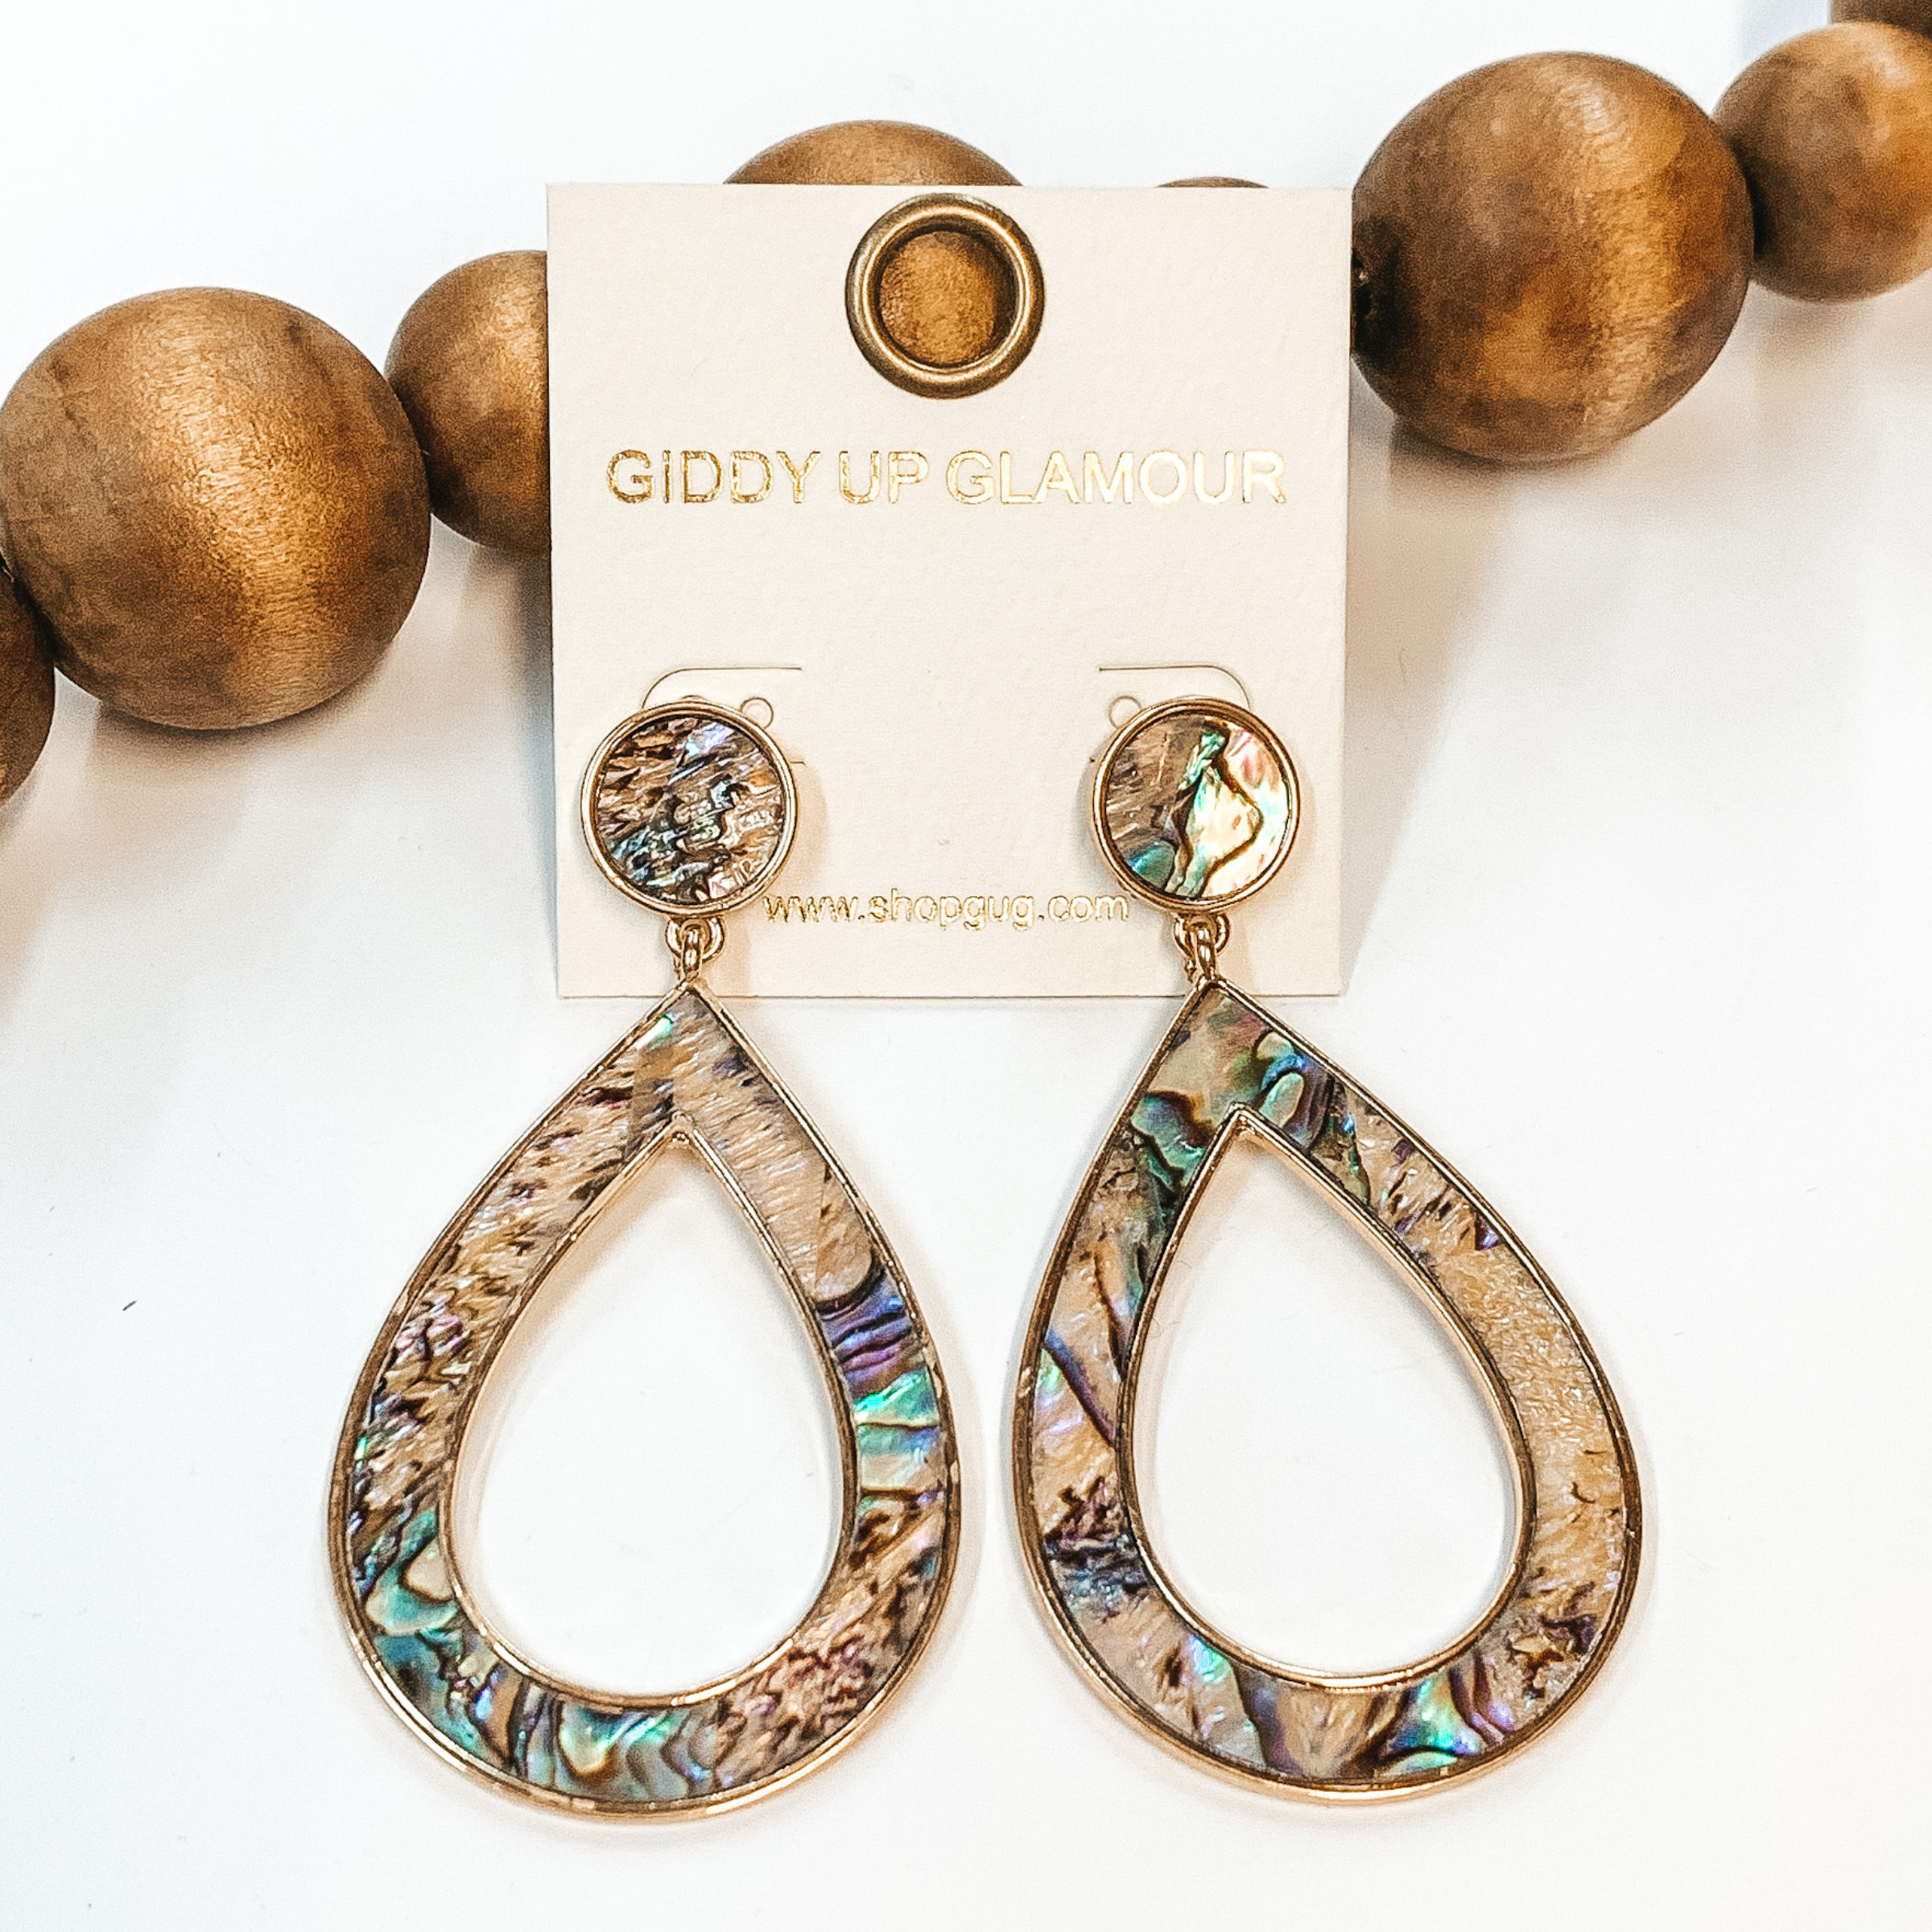 Open teardrop earrings in abalone shell with  gold outline. Taken in a white background with  brown beads as decor.